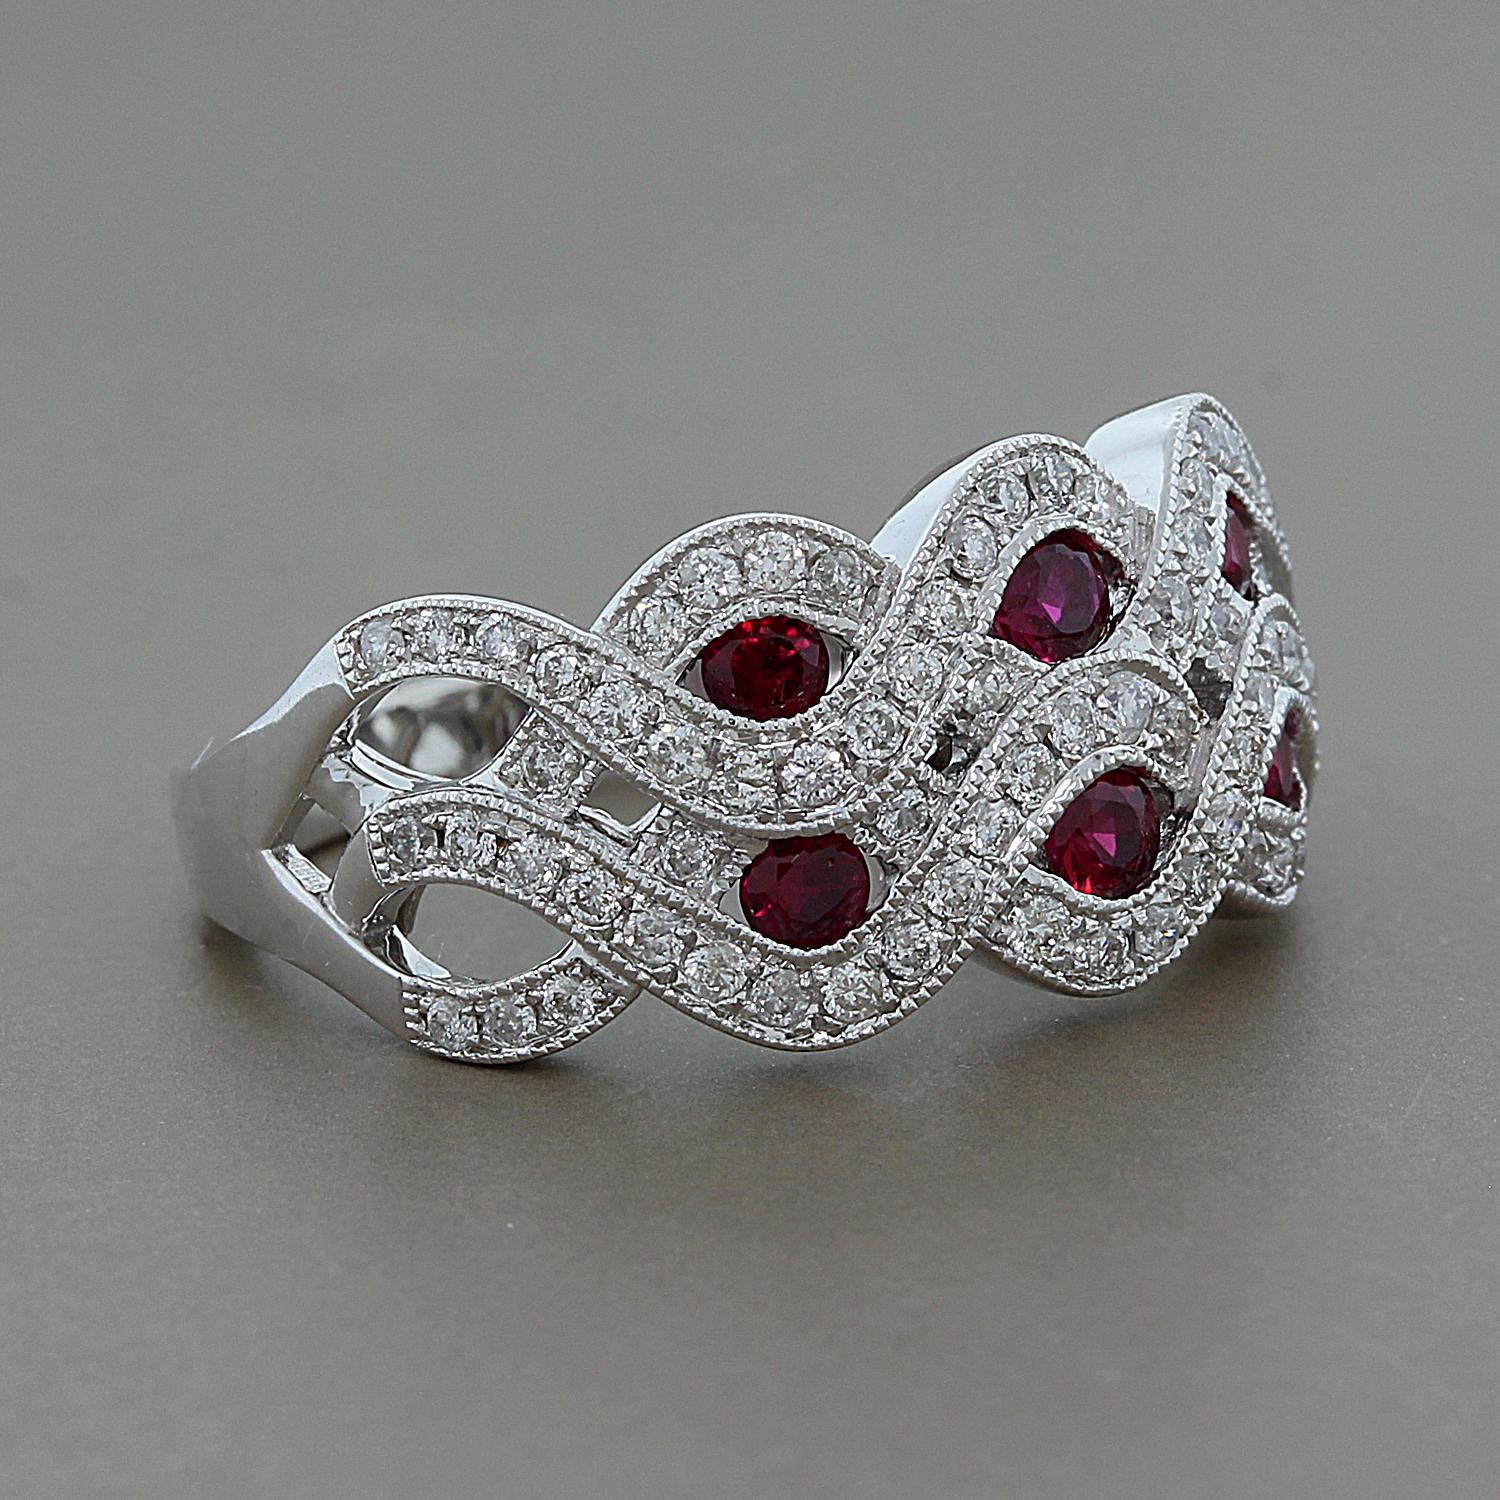 A beautifully elegant ring featuring 0.46 carats of round cut rubies surrounded by a wave of 0.50 carats of round diamonds.  All set in 14K white gold.

Currently ring size 7